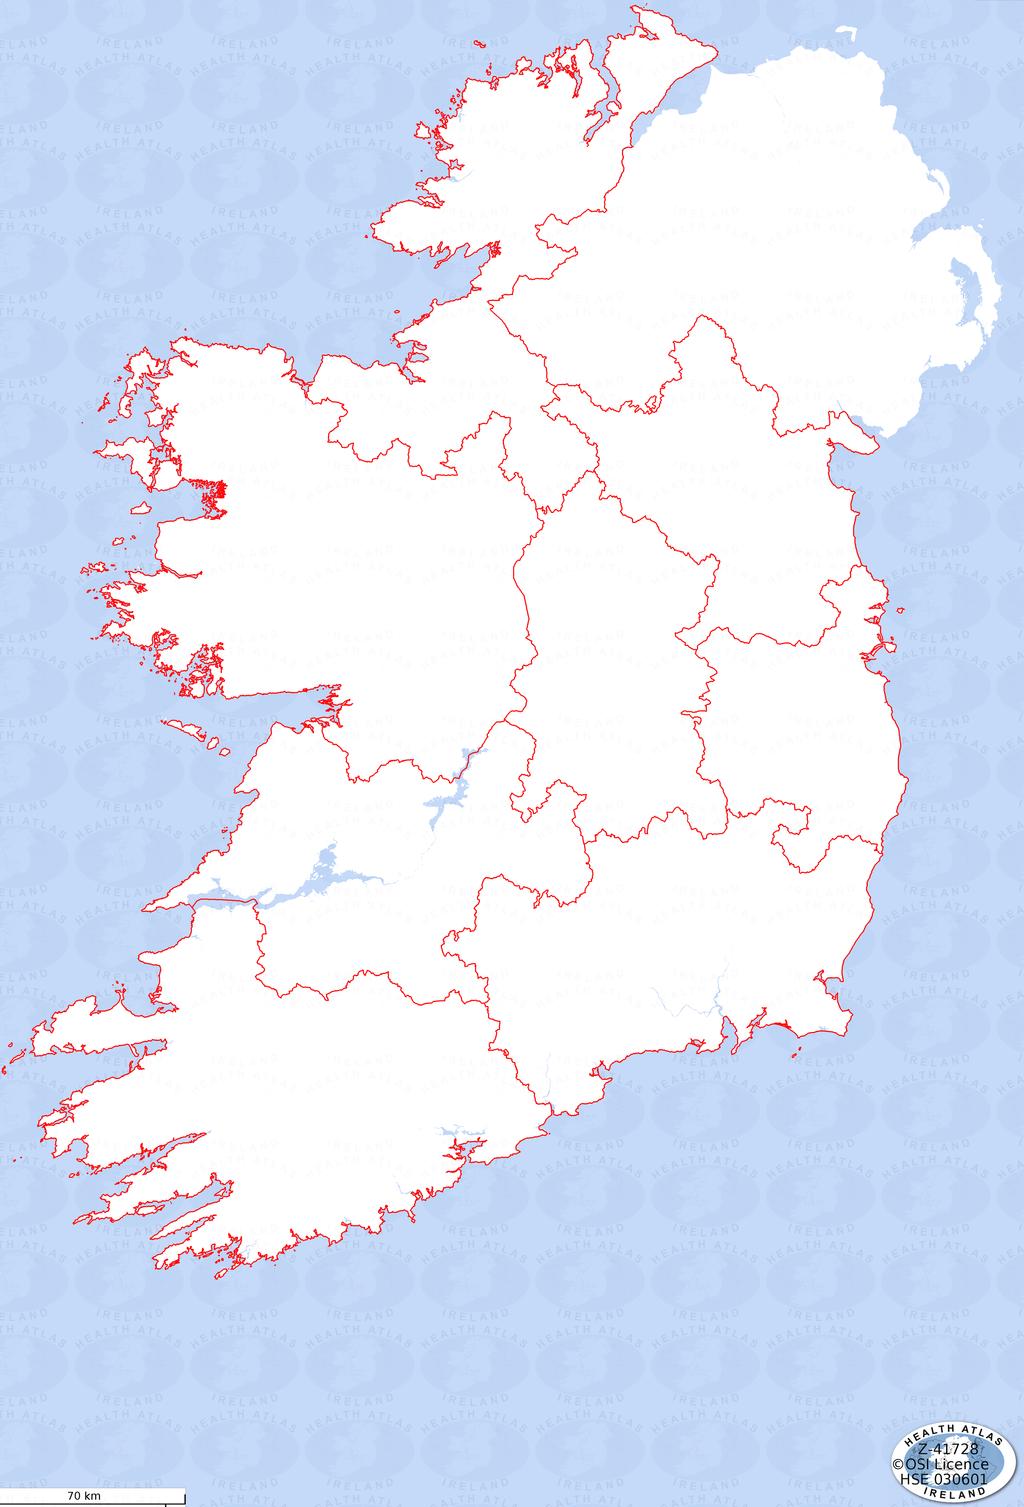 Overview of OHCAR implementation NORTHERN IRELAND North West Population: 238,317 North-East Population: 392,888 West Population: 414,277 Midlands Population: 251,664 East Population: